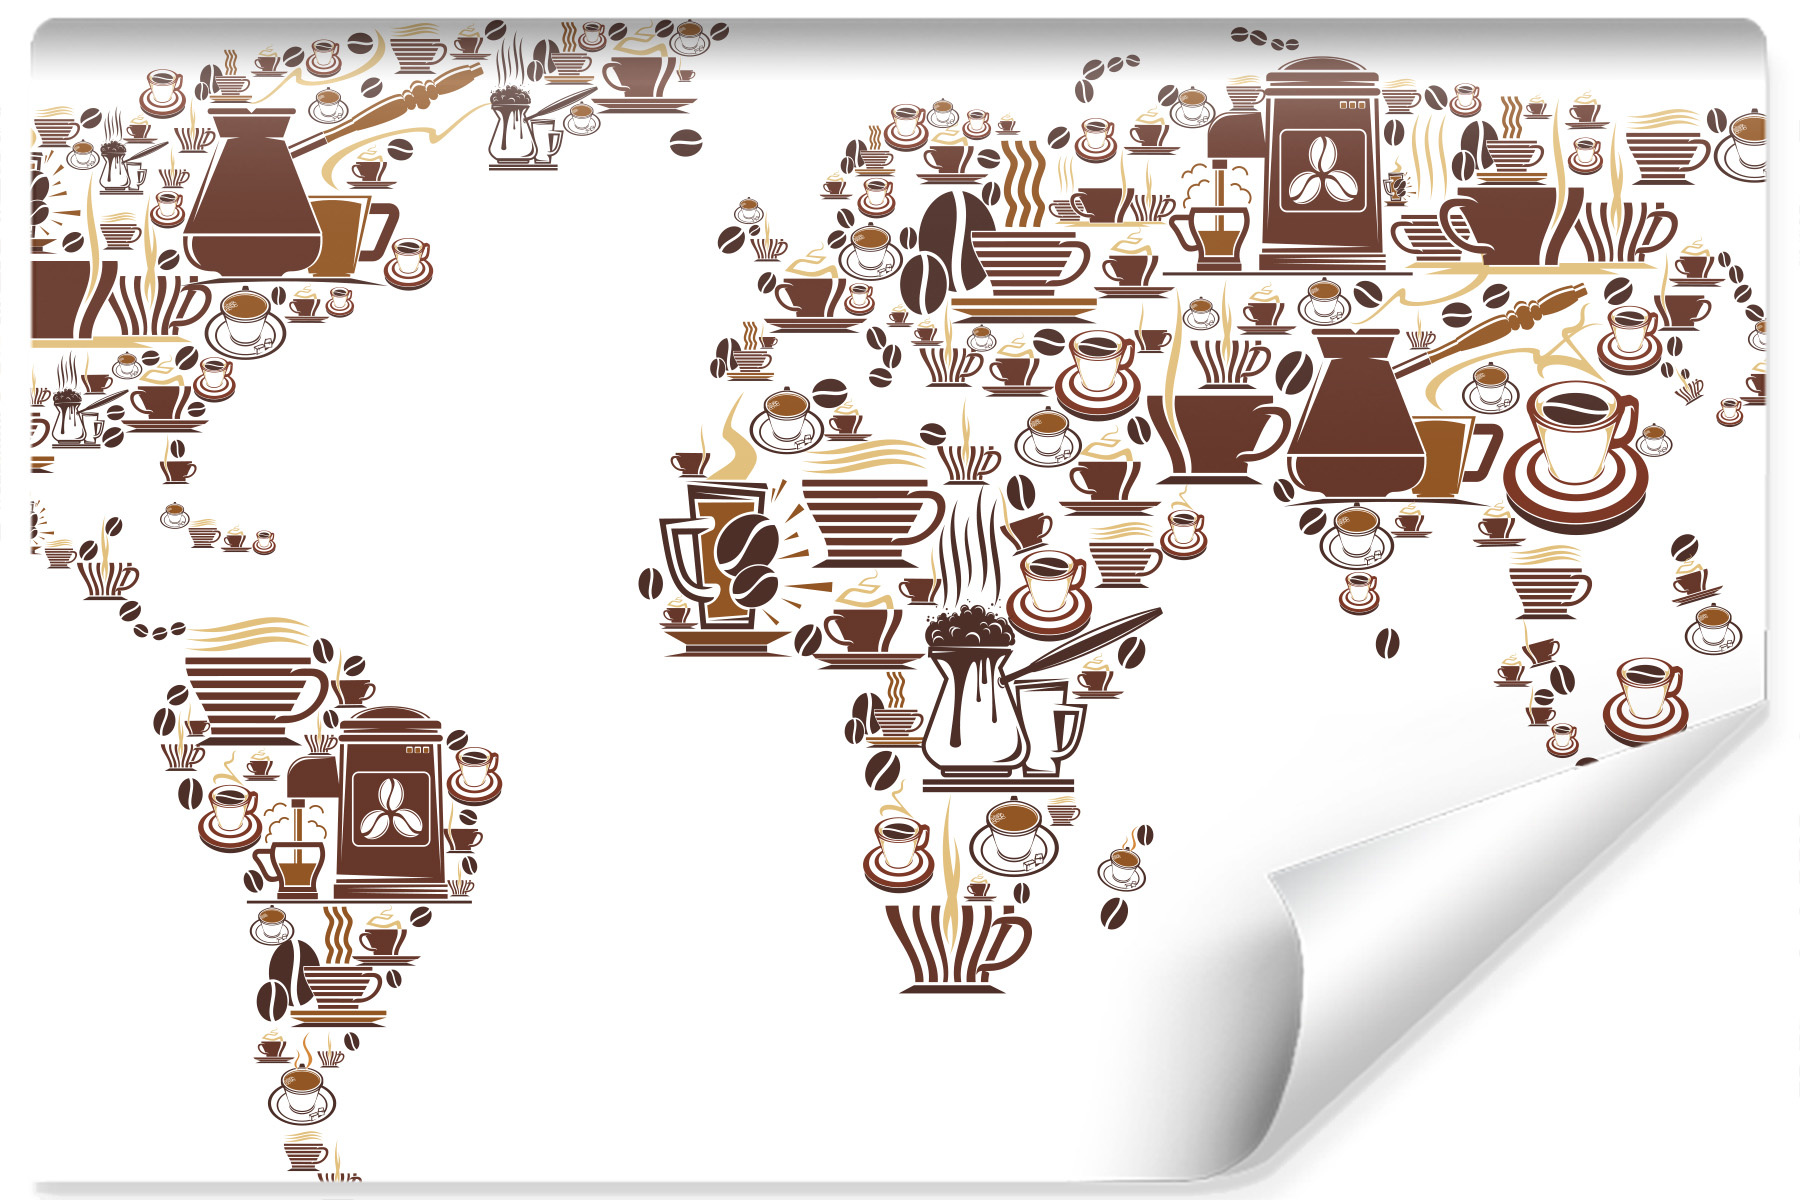 Photo wallpaper Coffee Map of the Wrold Non-woven 104 x 70.5 cm FT-3031-VEM